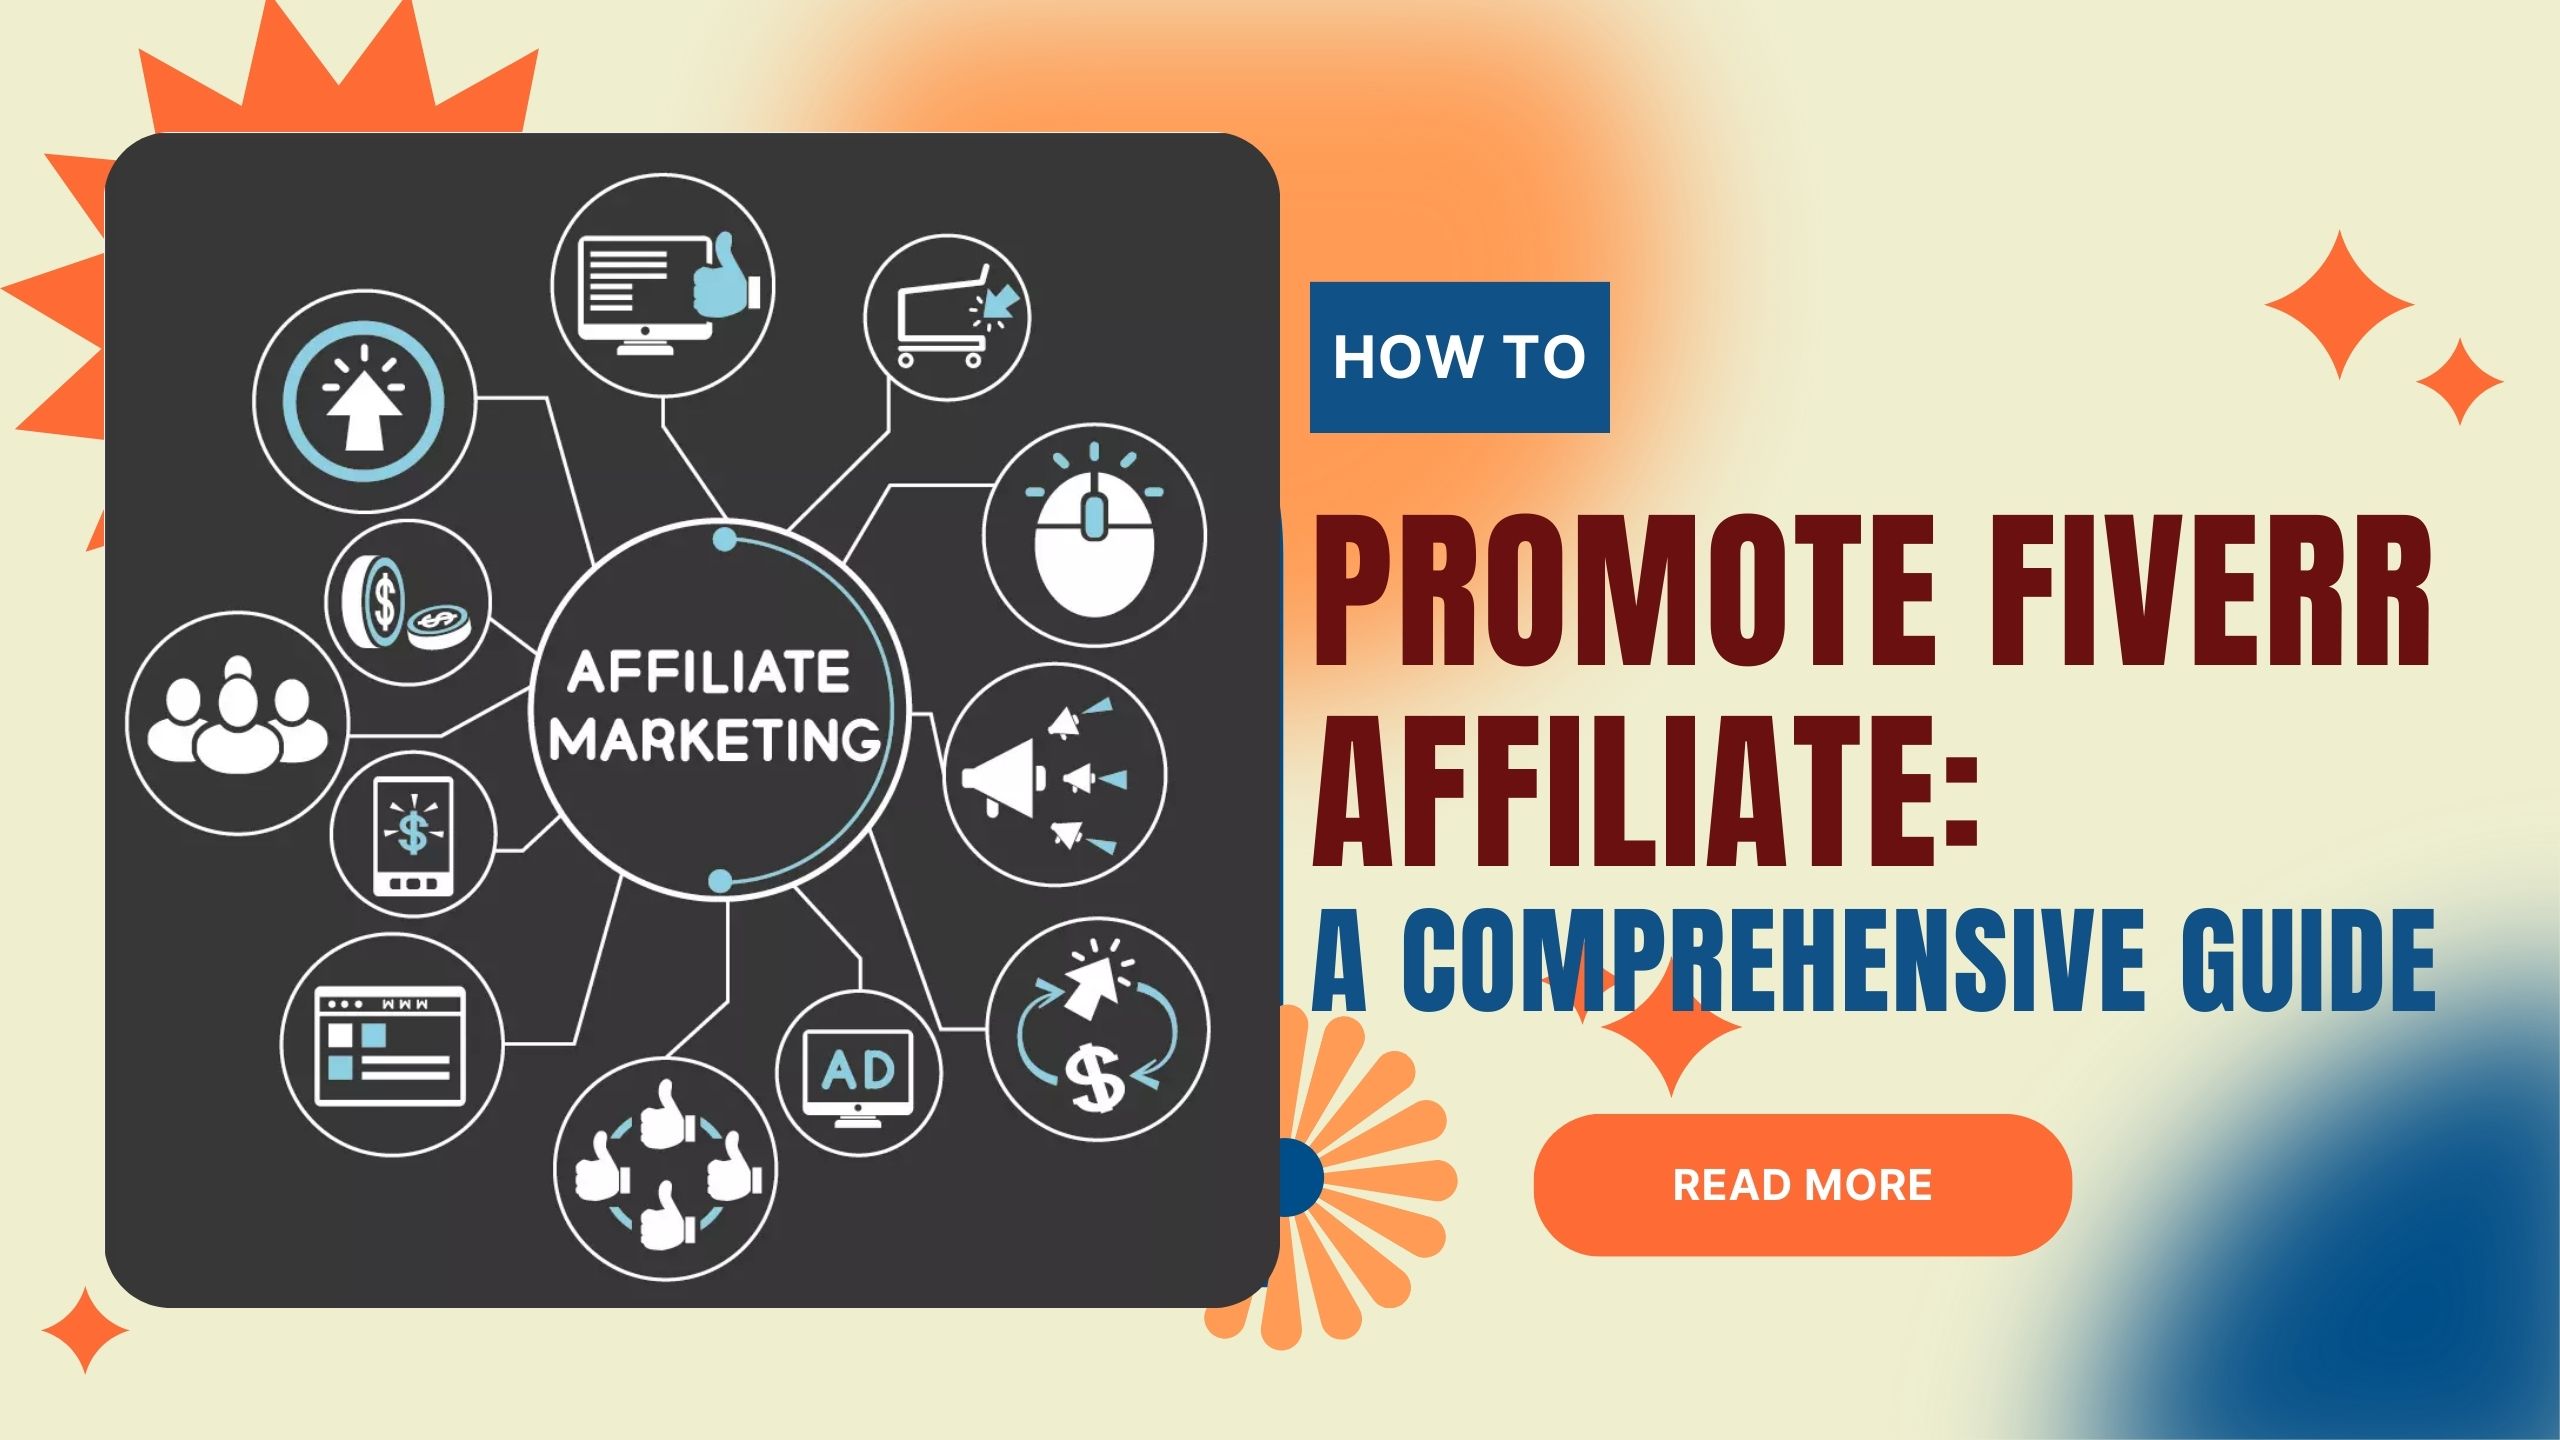 How to Promote Fiverr Affiliate: A Comprehensive Guide